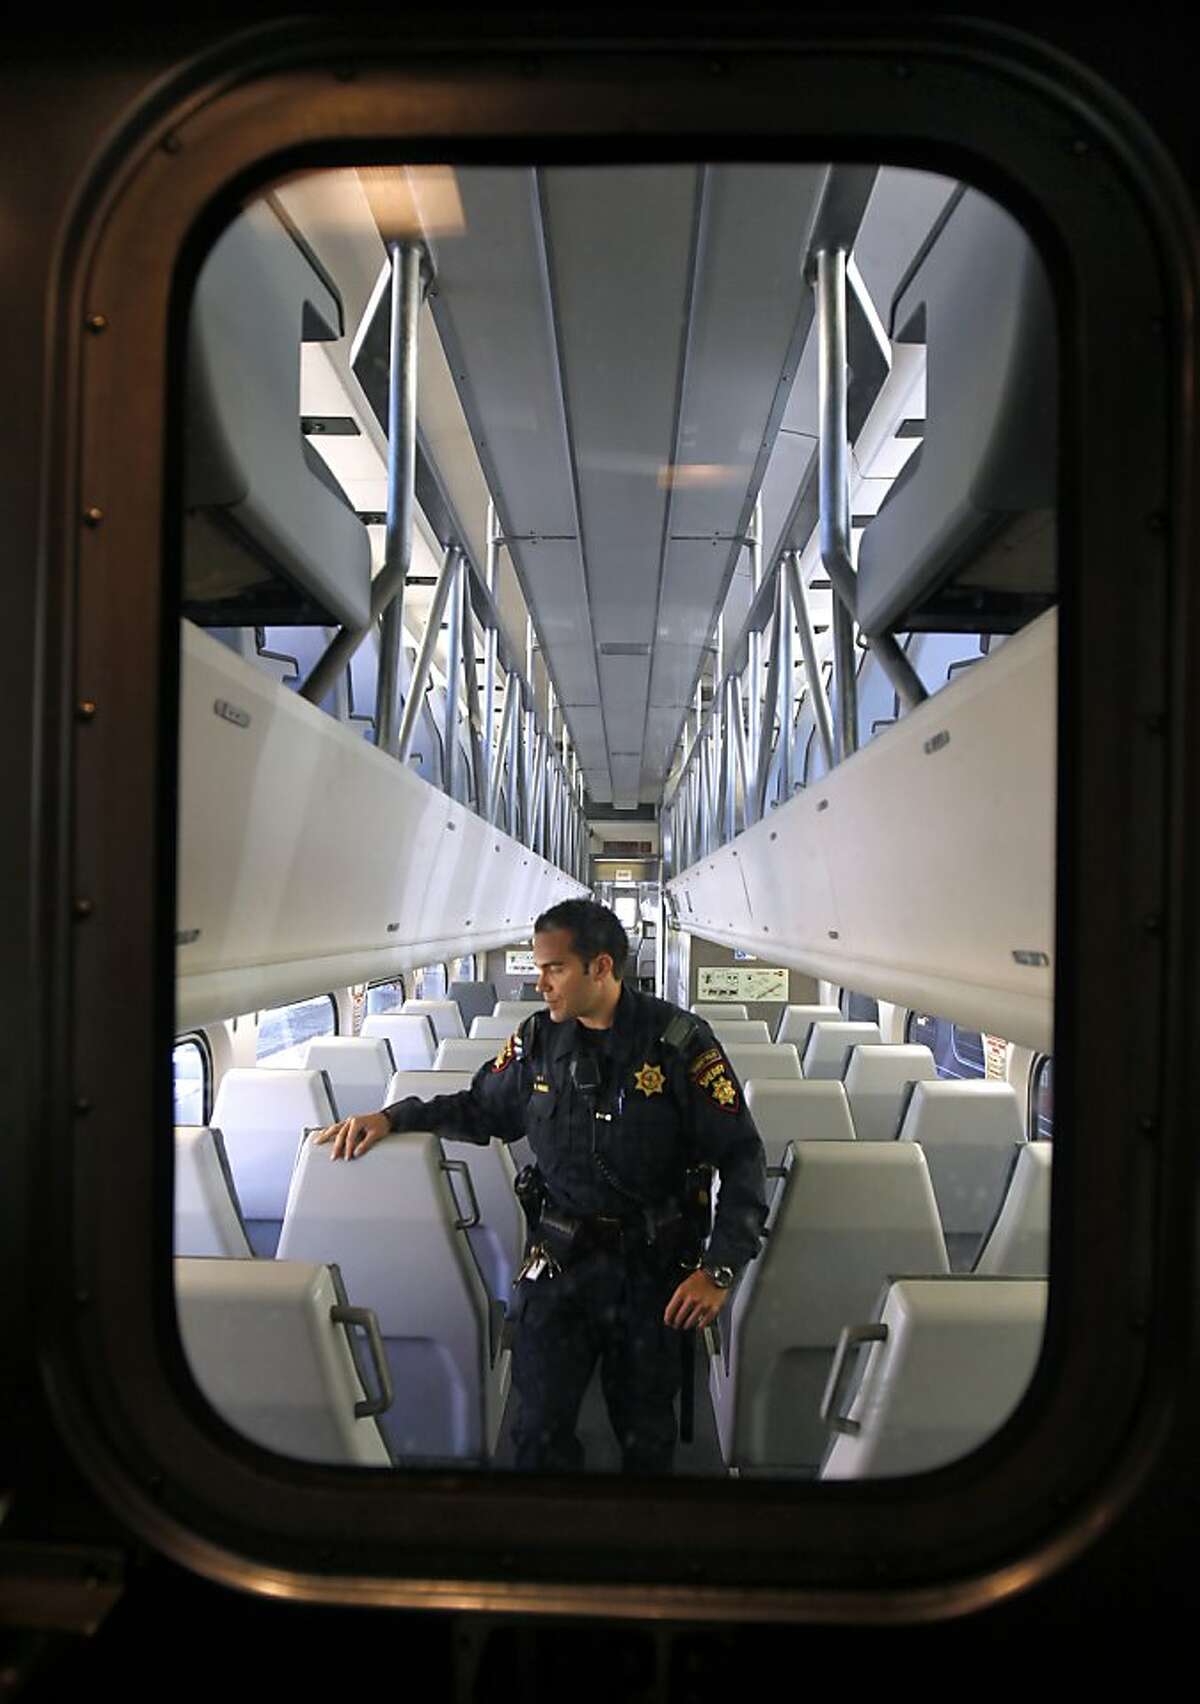 San Mateo County Sheriff's Deputy Brandon Hensel, assigned to the transit patrol detail, walks through an empty train at the Caltrain station in San Francisco, Calif. before it heads southbound on Wednesday, Aug. 8, 2012.